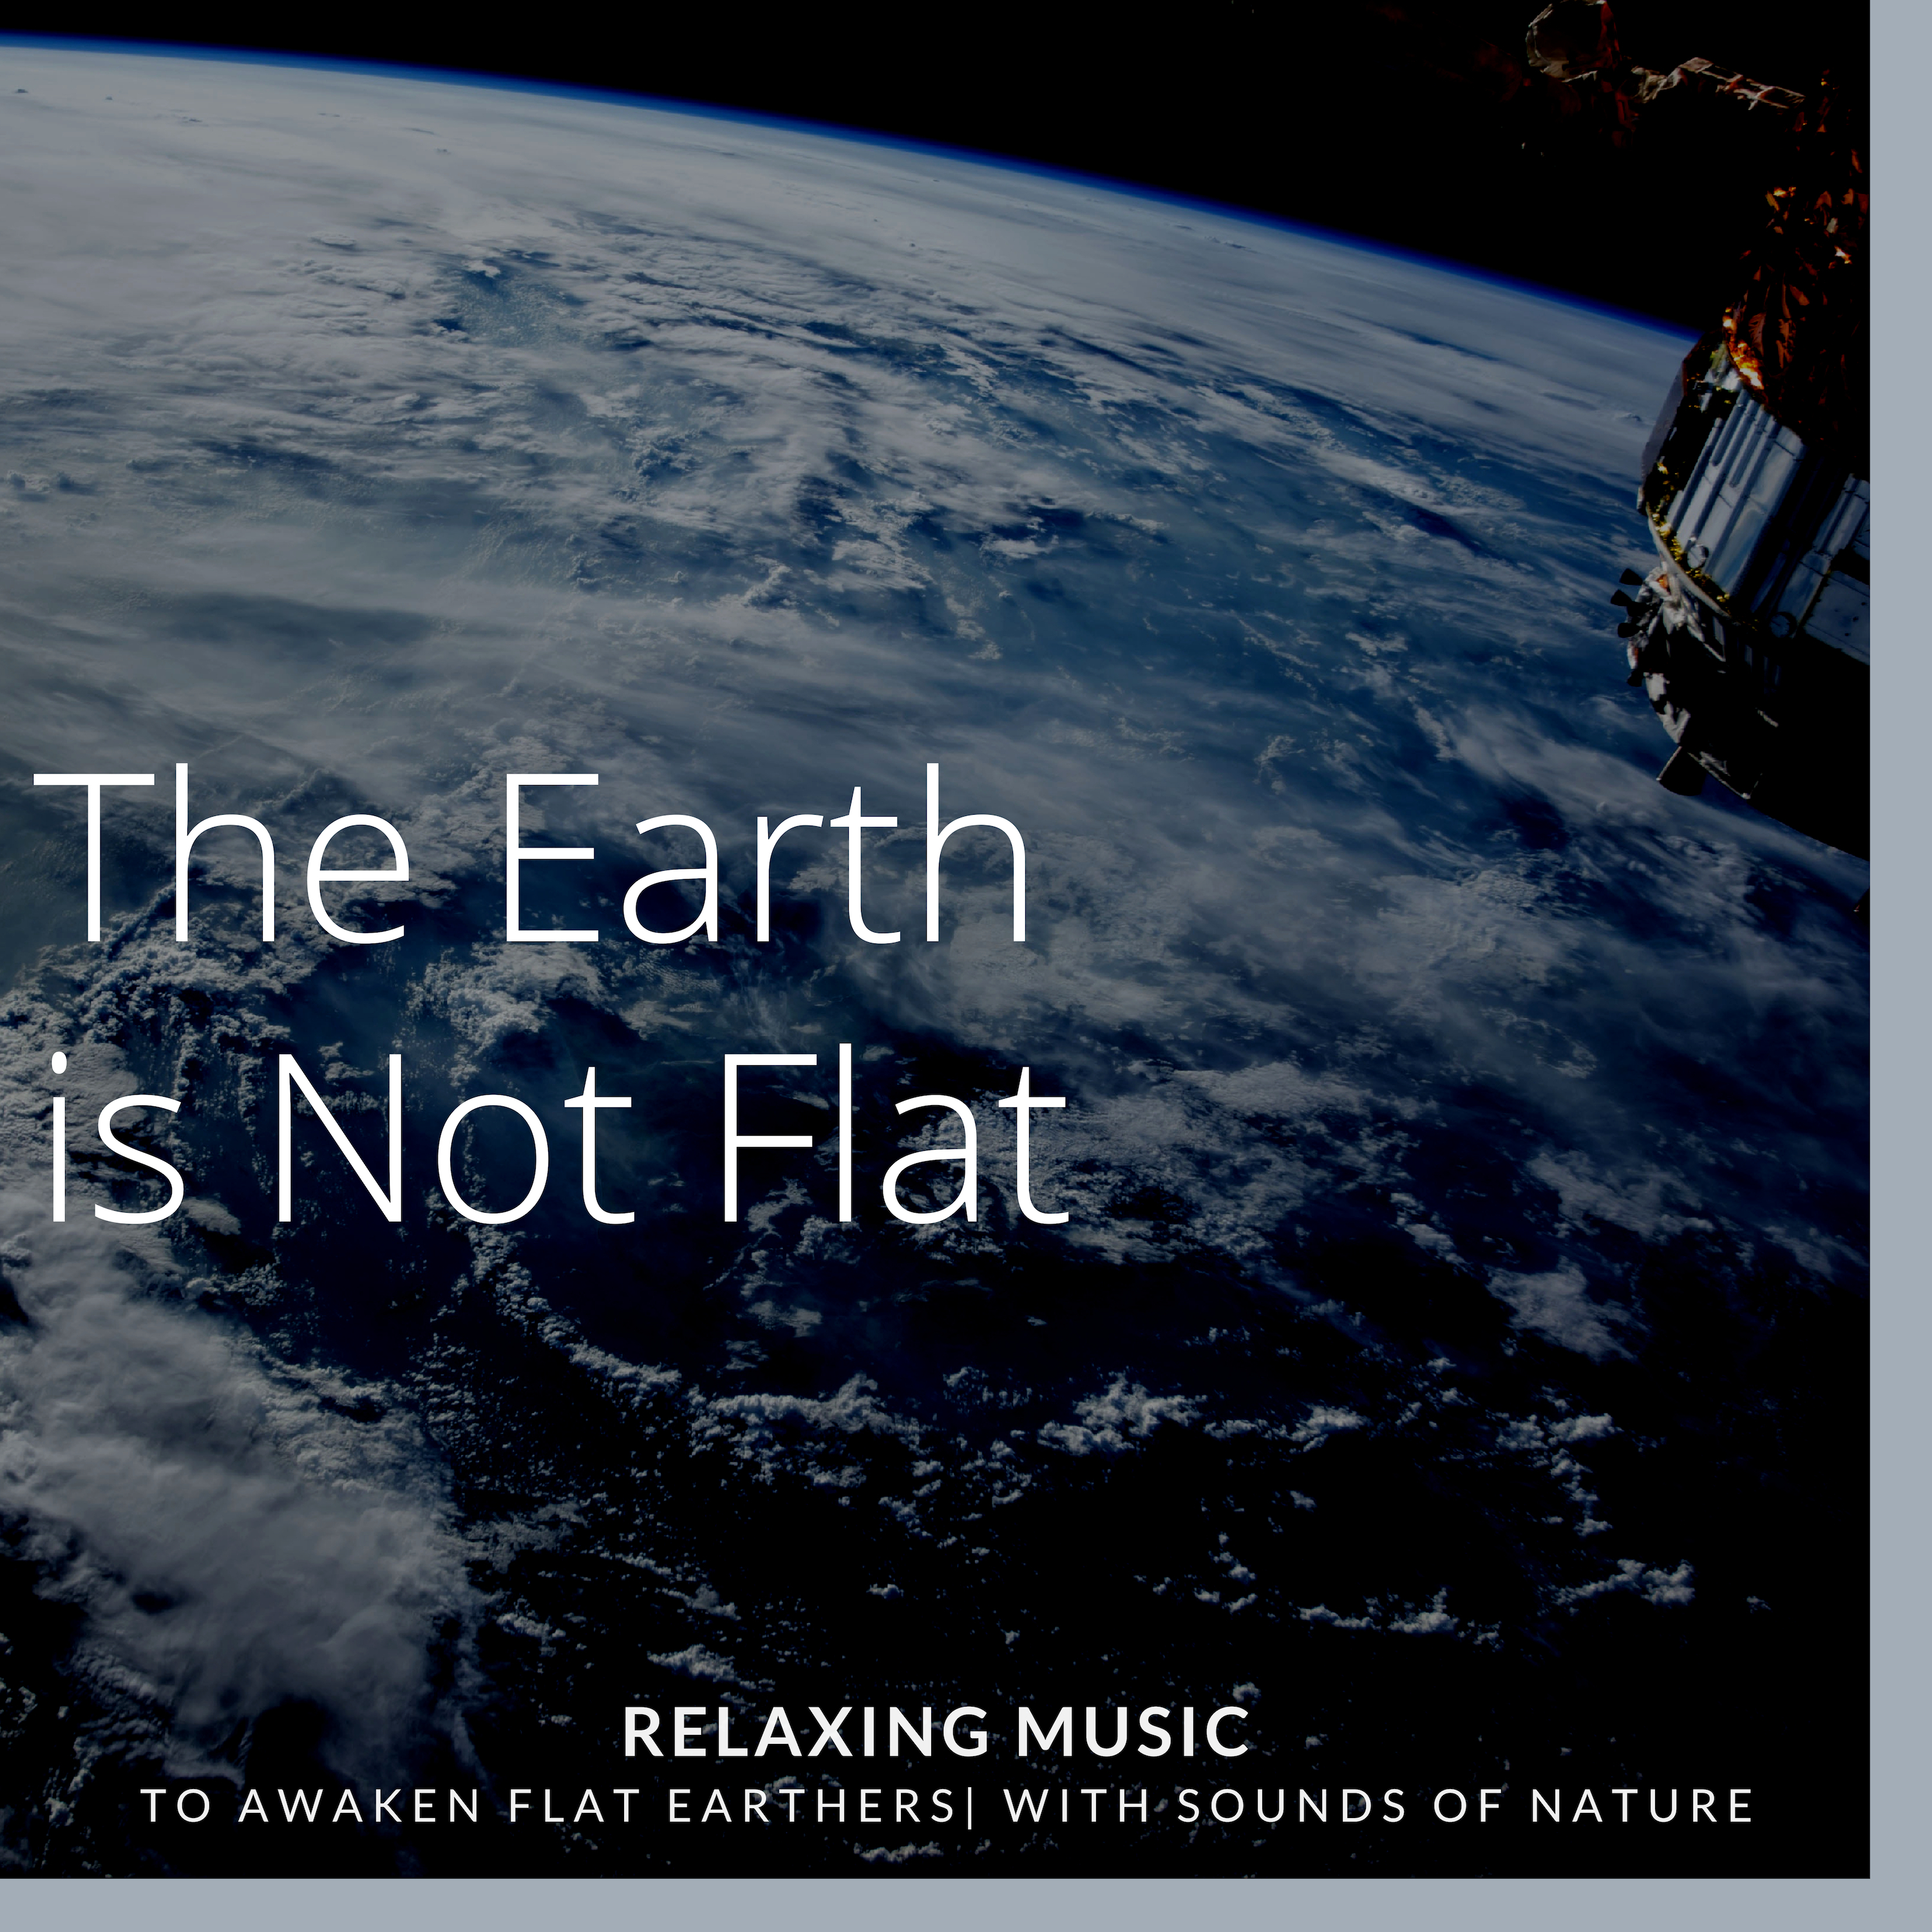 The Earth is Not Flat - Relaxing Music to Awaken Flat Earthers with Sounds of Nature